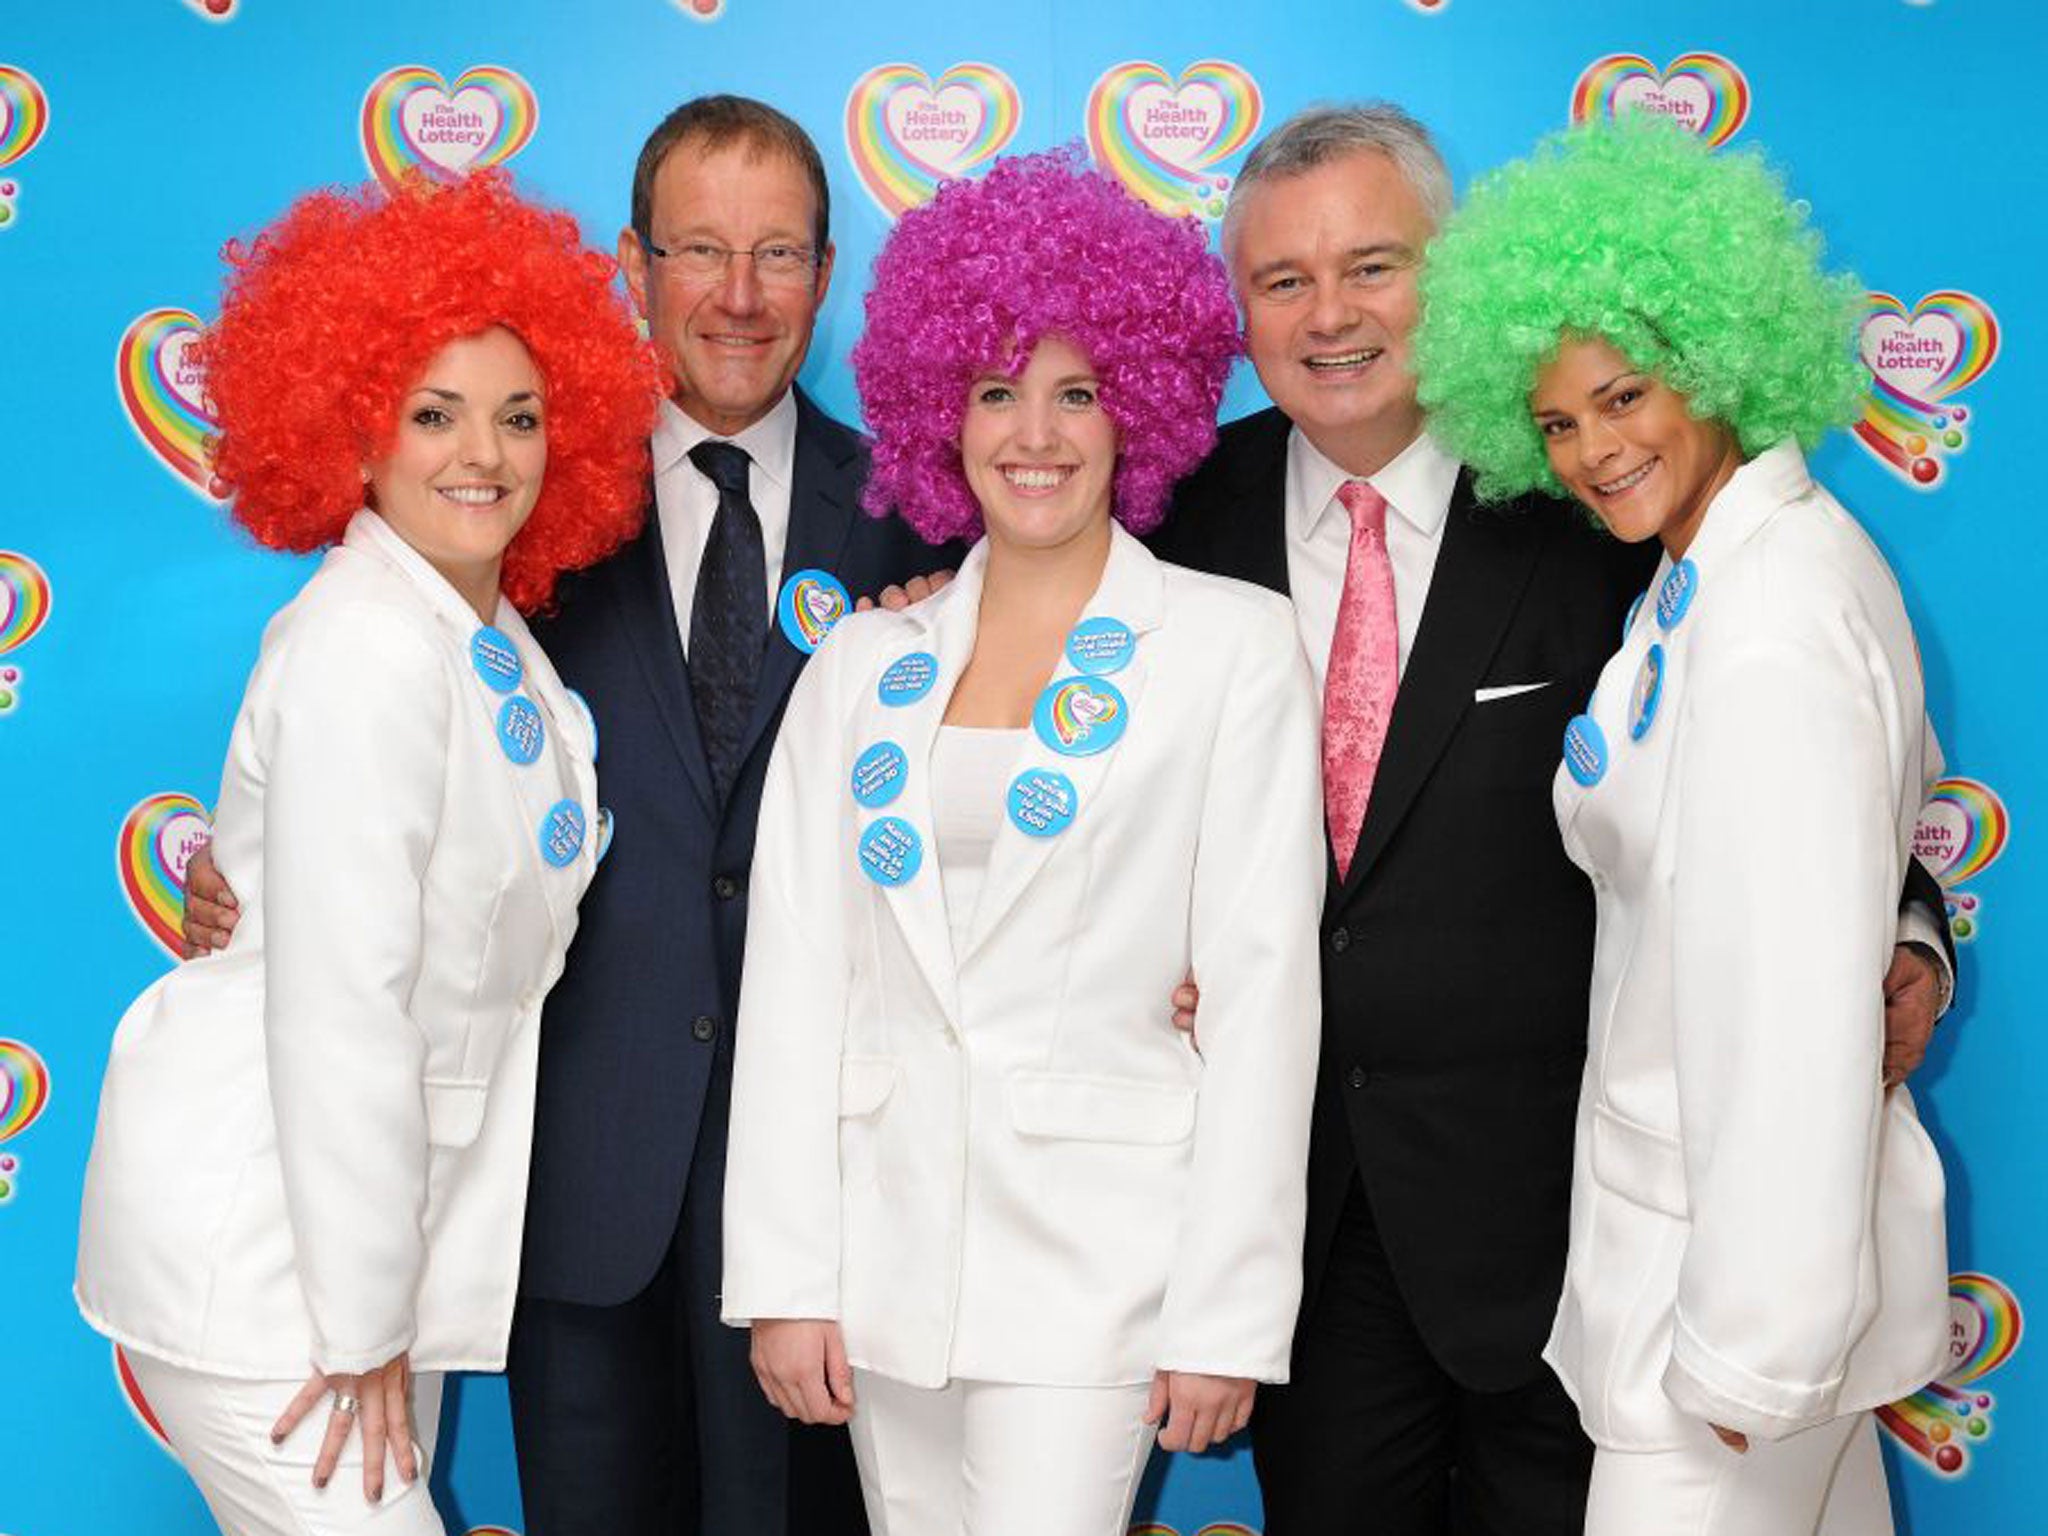 Richard Desmond launching the Health Lottery with TV presenter Eamonn Holmes